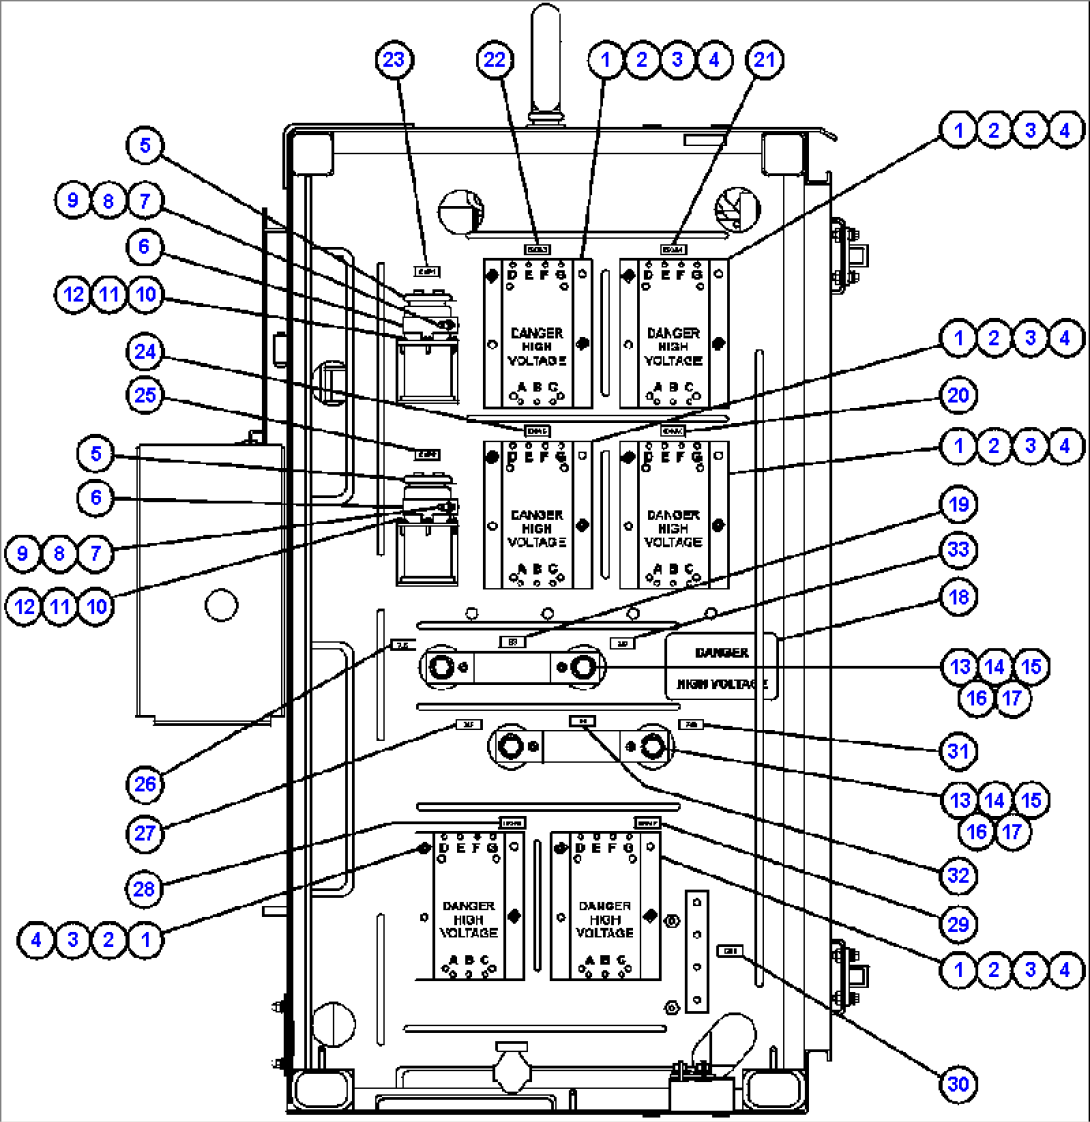 CONTROL CABINET - CENTER DOOR (RIGHT SIDE WALL)